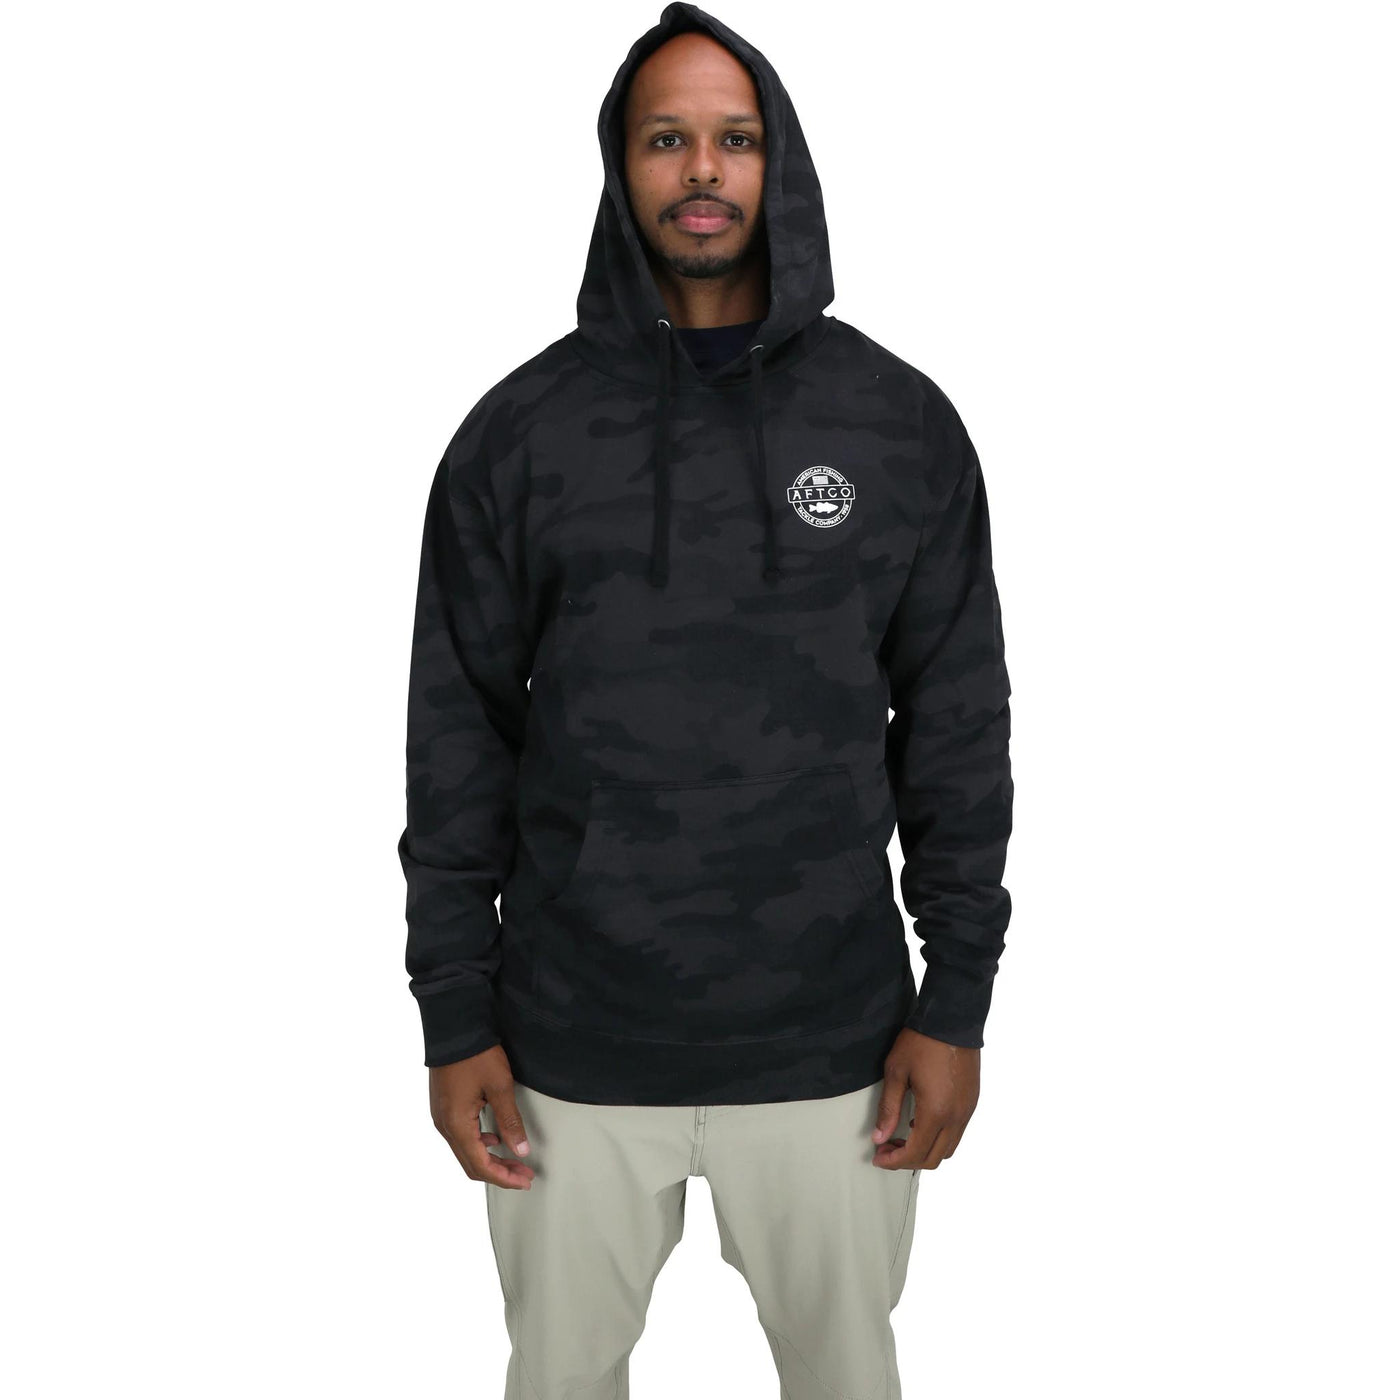 Aftco Bass Patch Pullover Hoodie-MENS CLOTHING-Kevin's Fine Outdoor Gear & Apparel